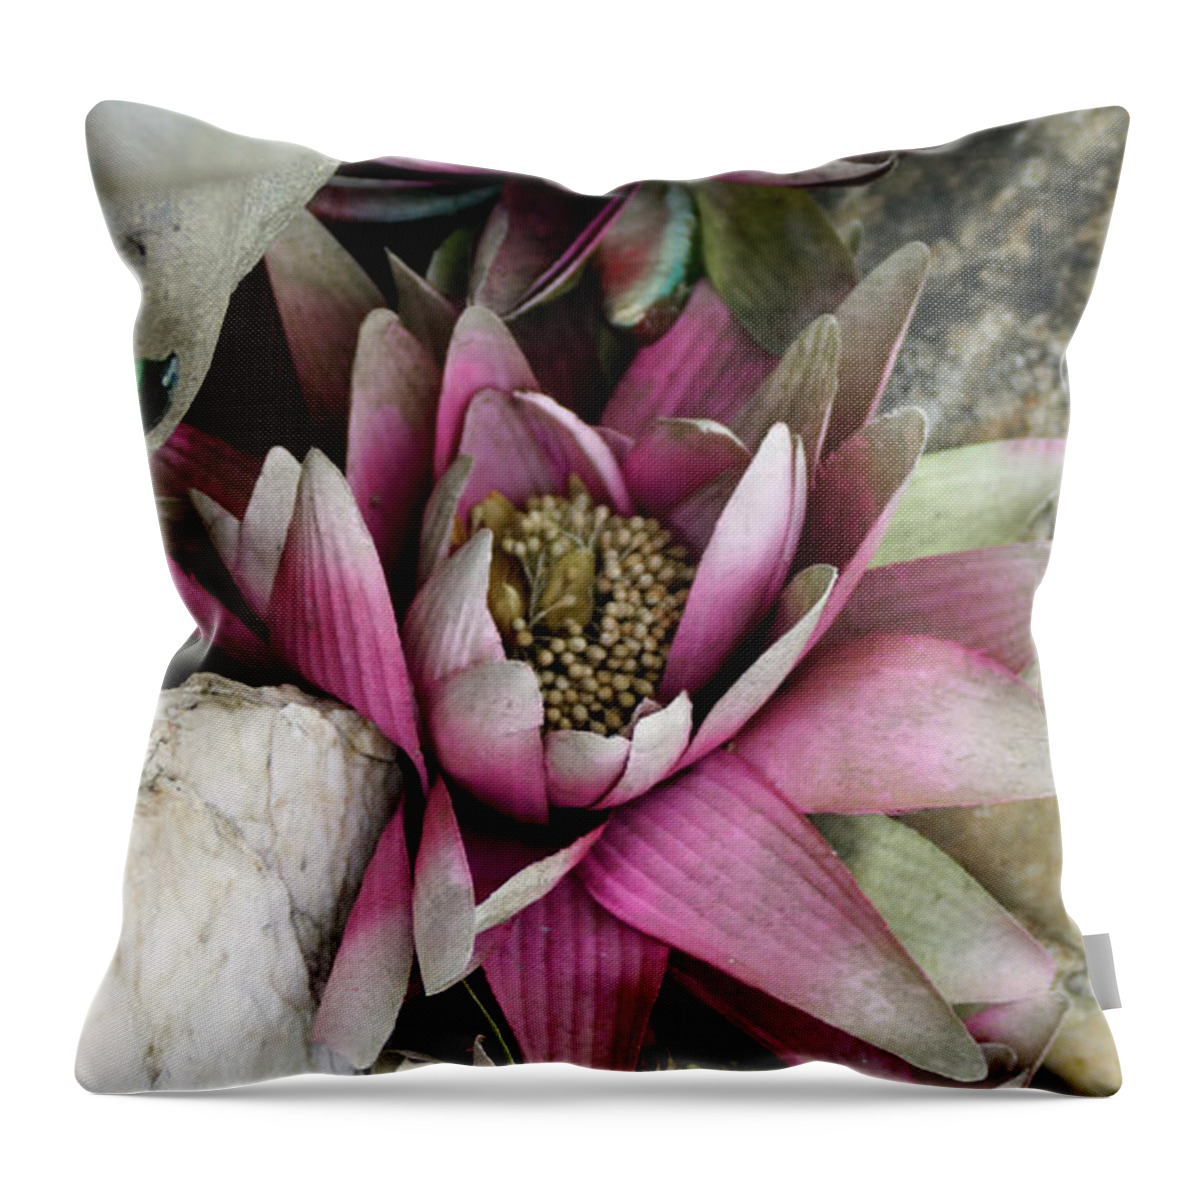 Seerose Throw Pillow featuring the photograph Water Lily - Seerose by Eva-Maria Di Bella